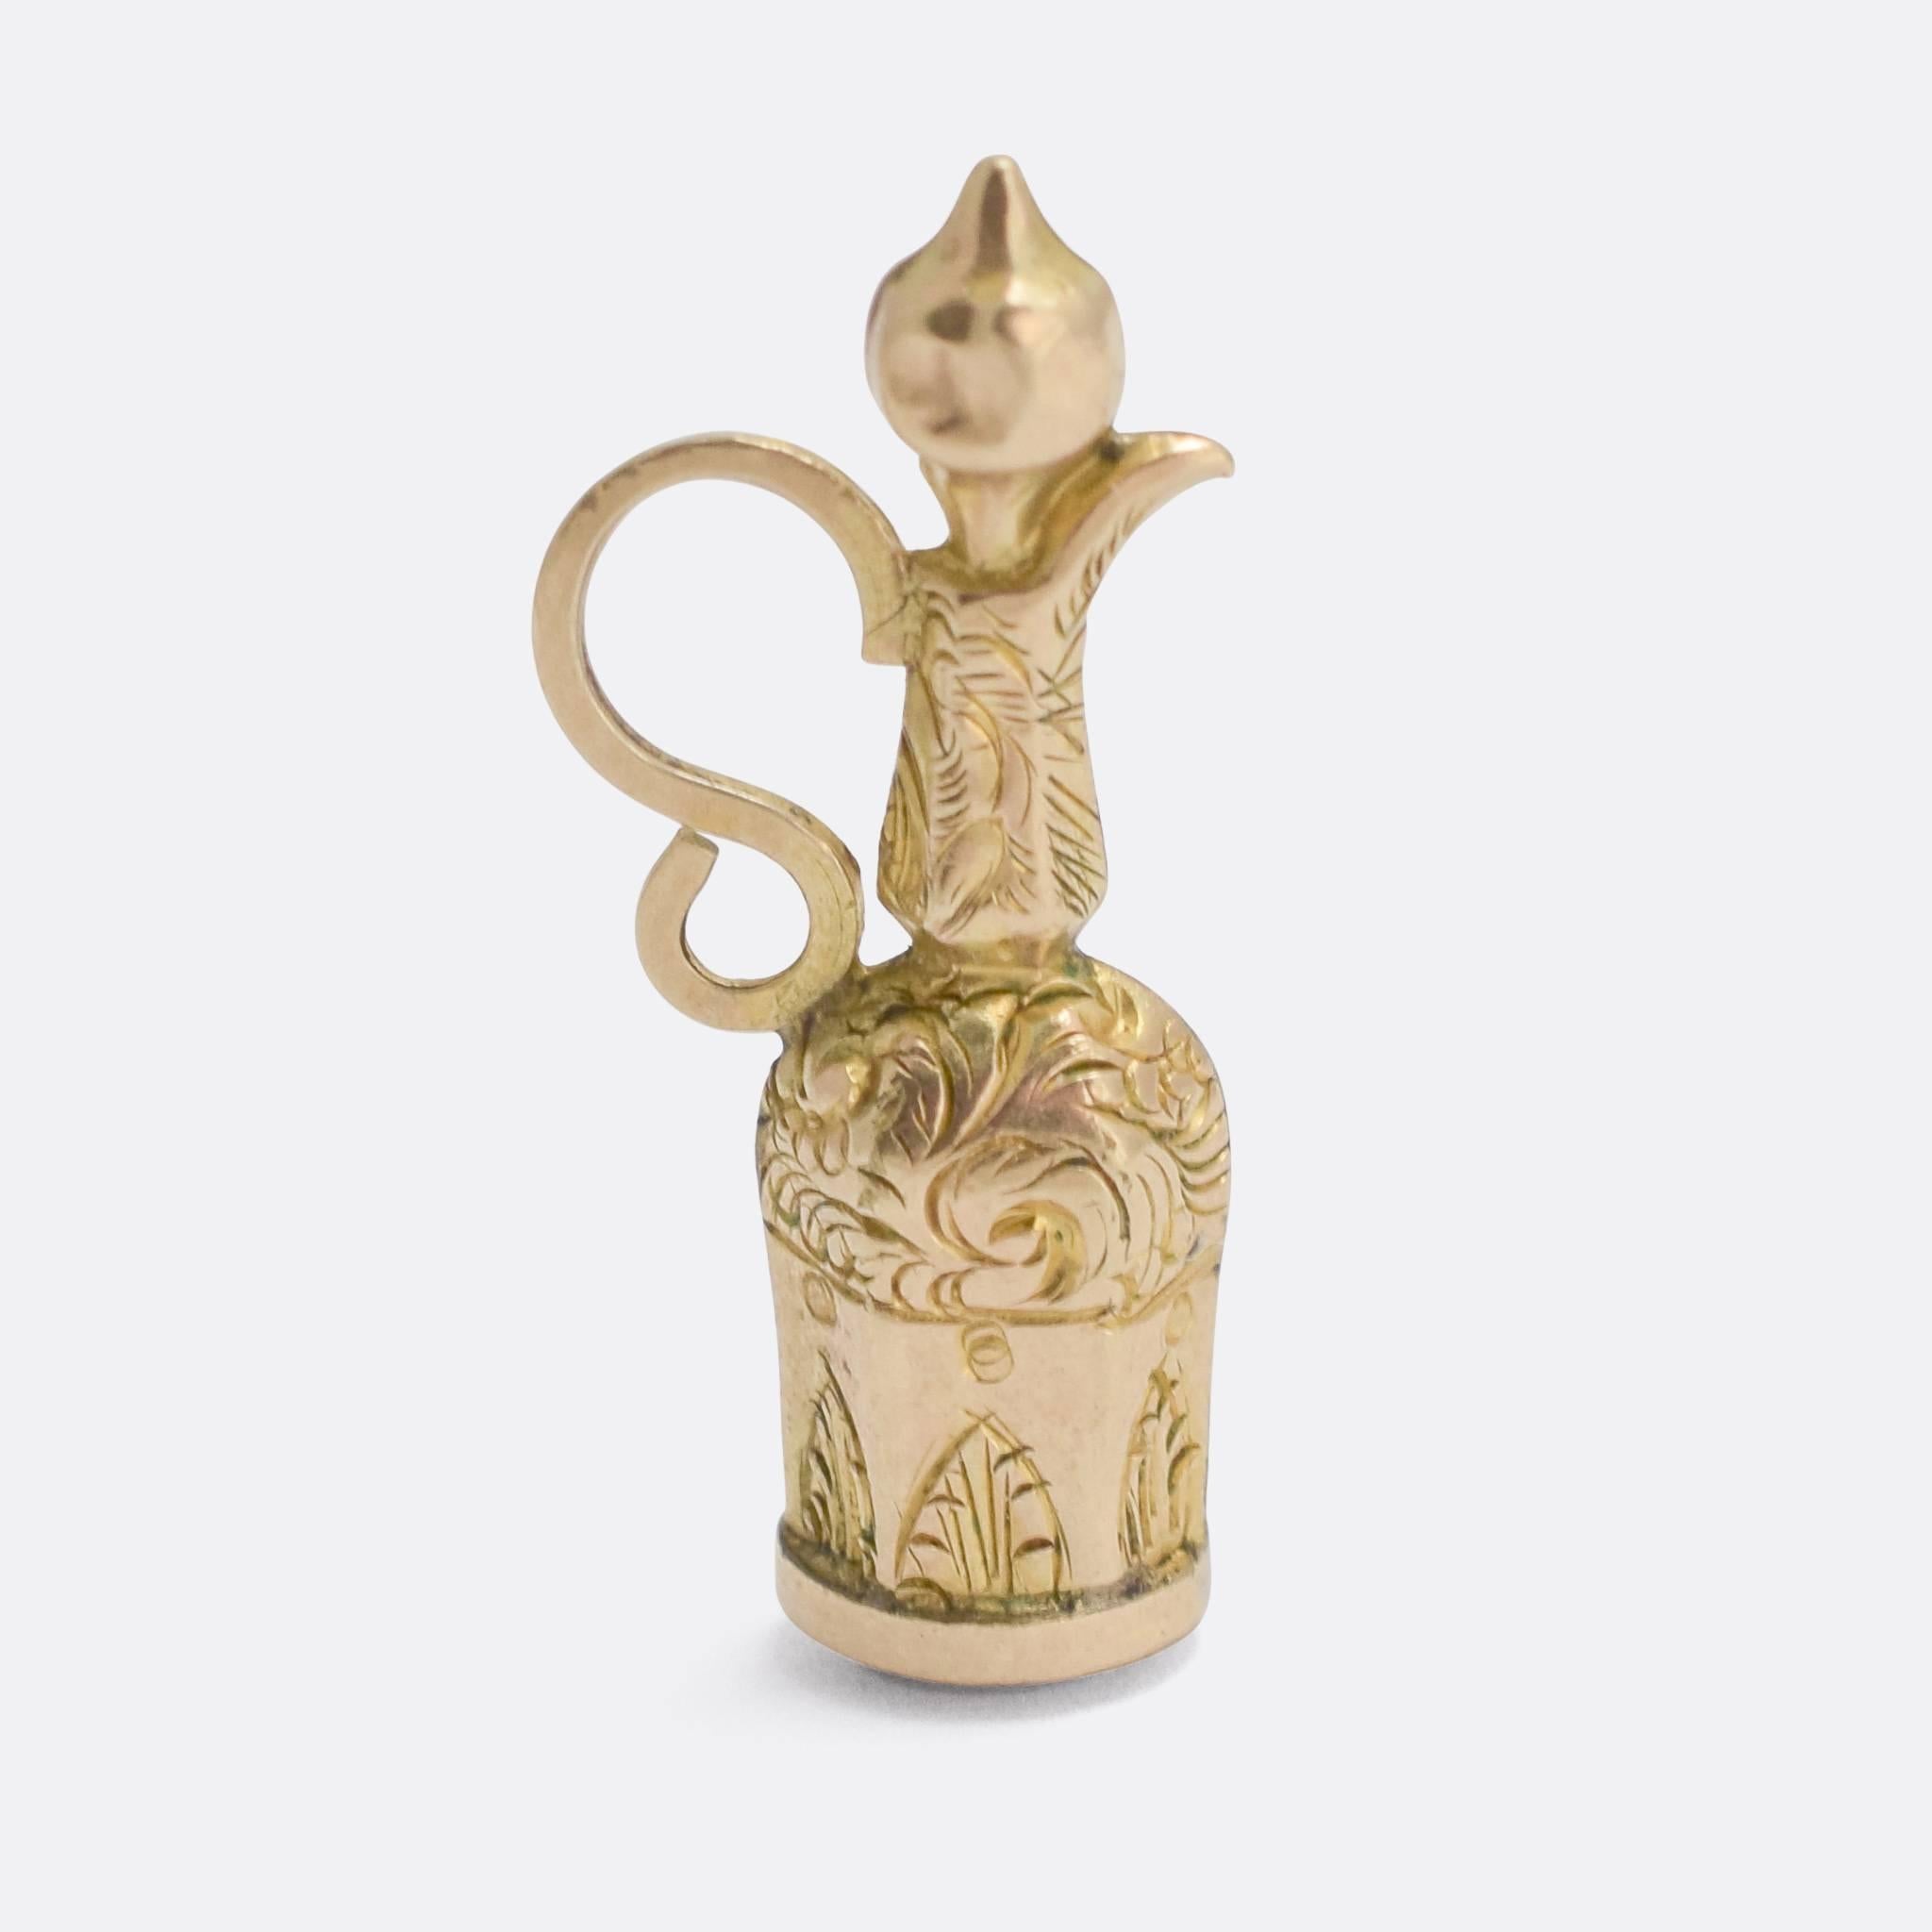 An unusual Georgian fob pendant, modelled as an oriental coffee jug (or similar). It's crafted from 9k gold, finely hand chased, and features a sardonyx panel to the base. It looks great as a simple pendant, or an addition to your charm